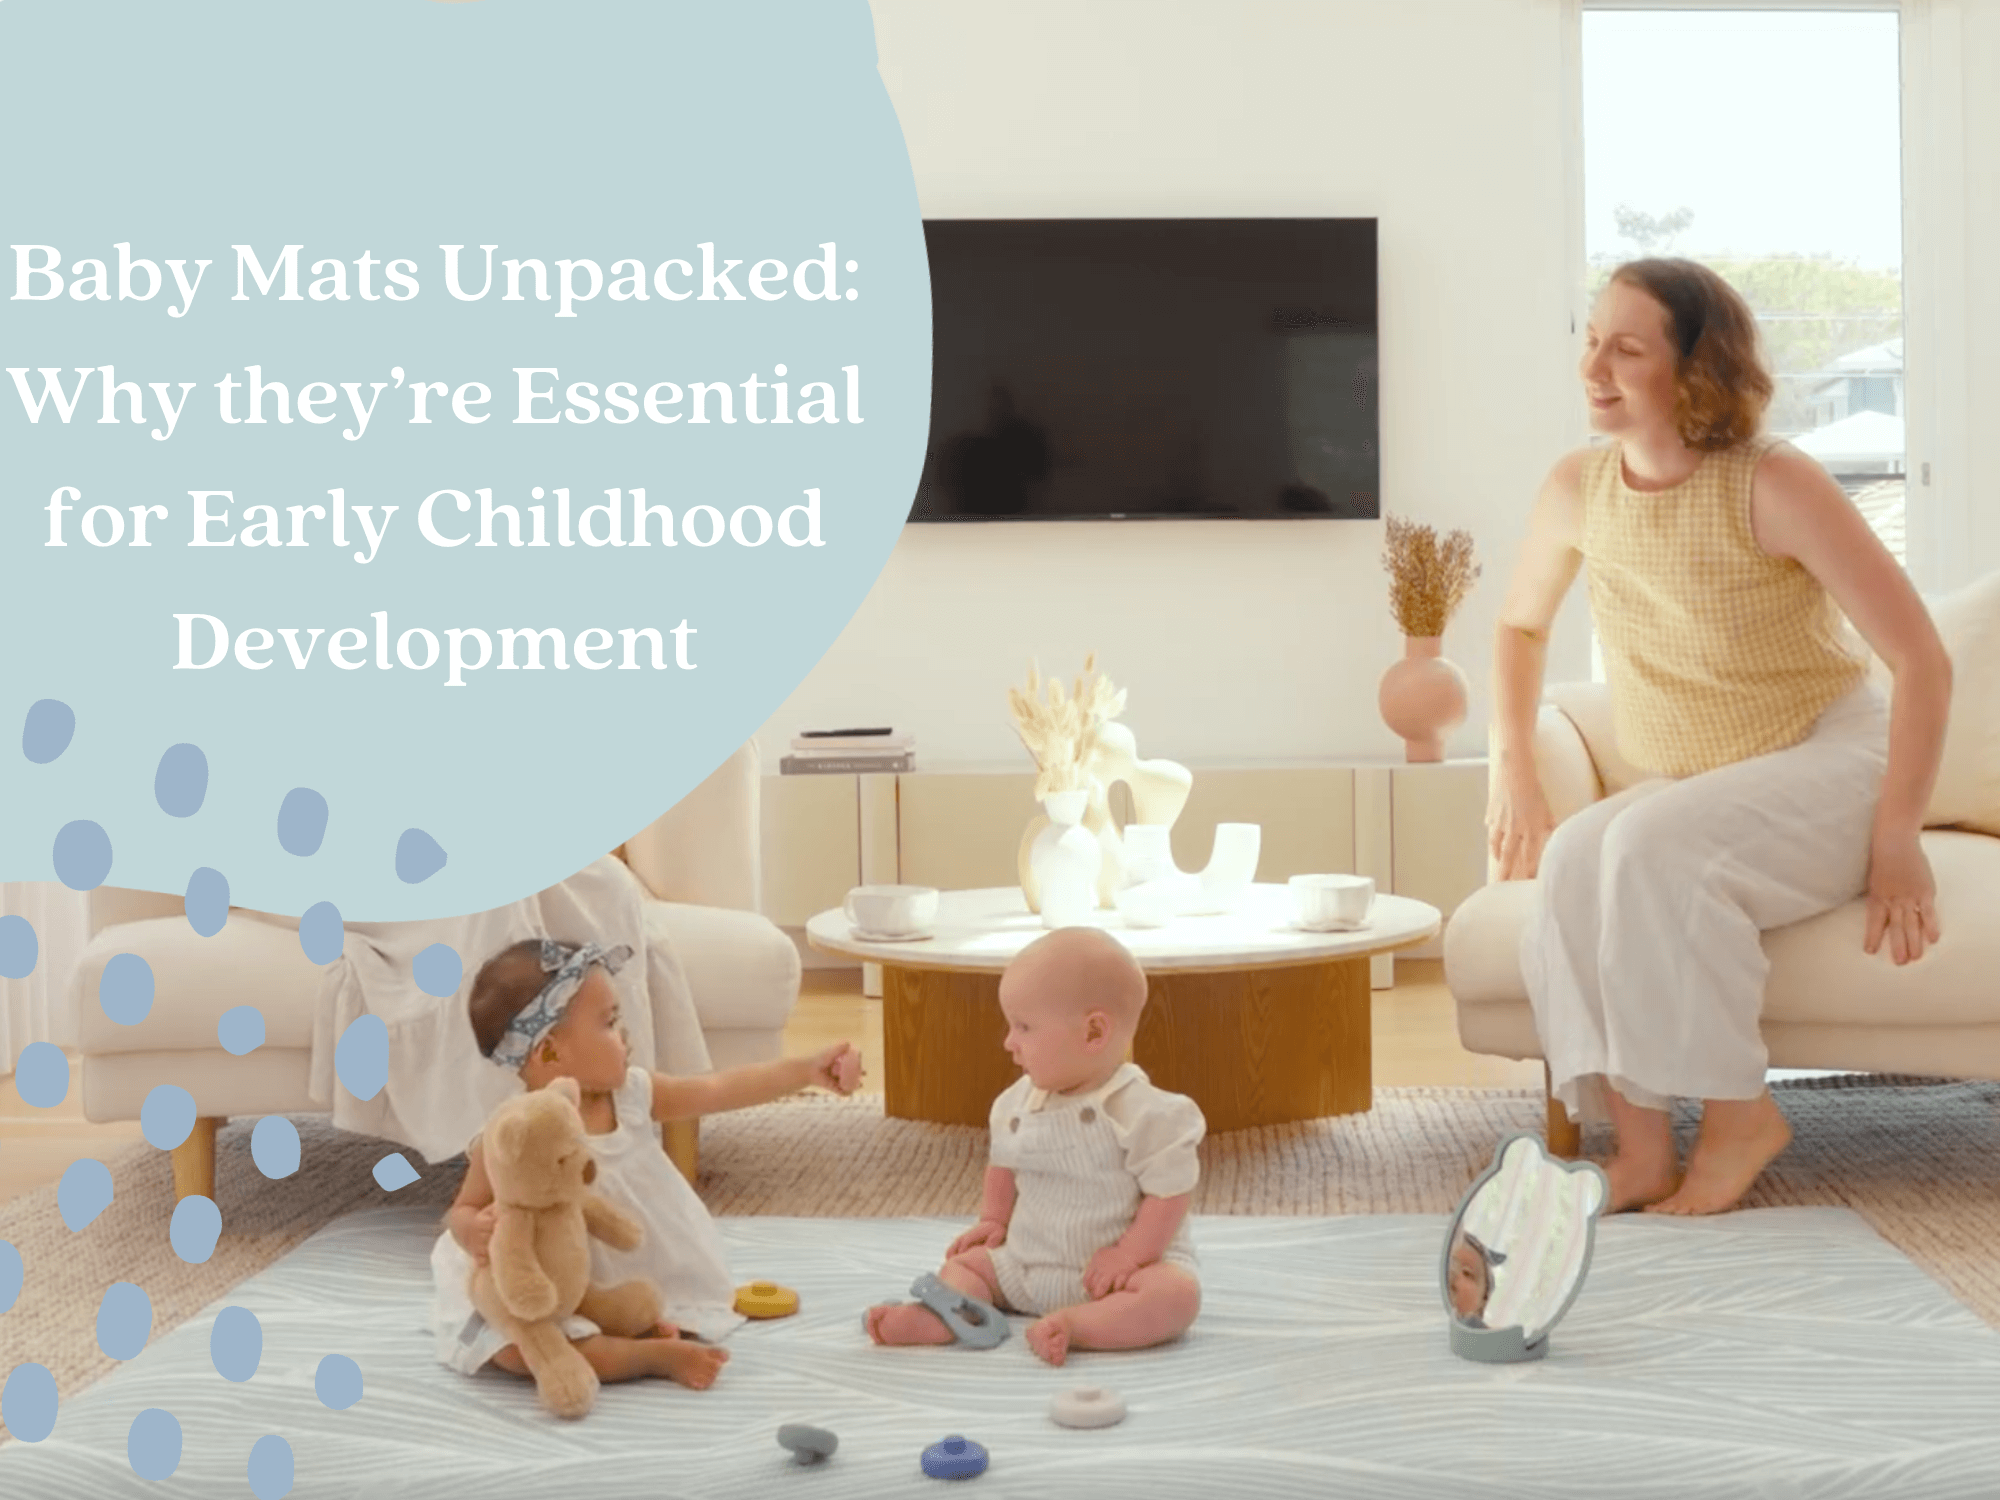 Baby Mats Unpacked: Why They're Essential for Early Childhood Development